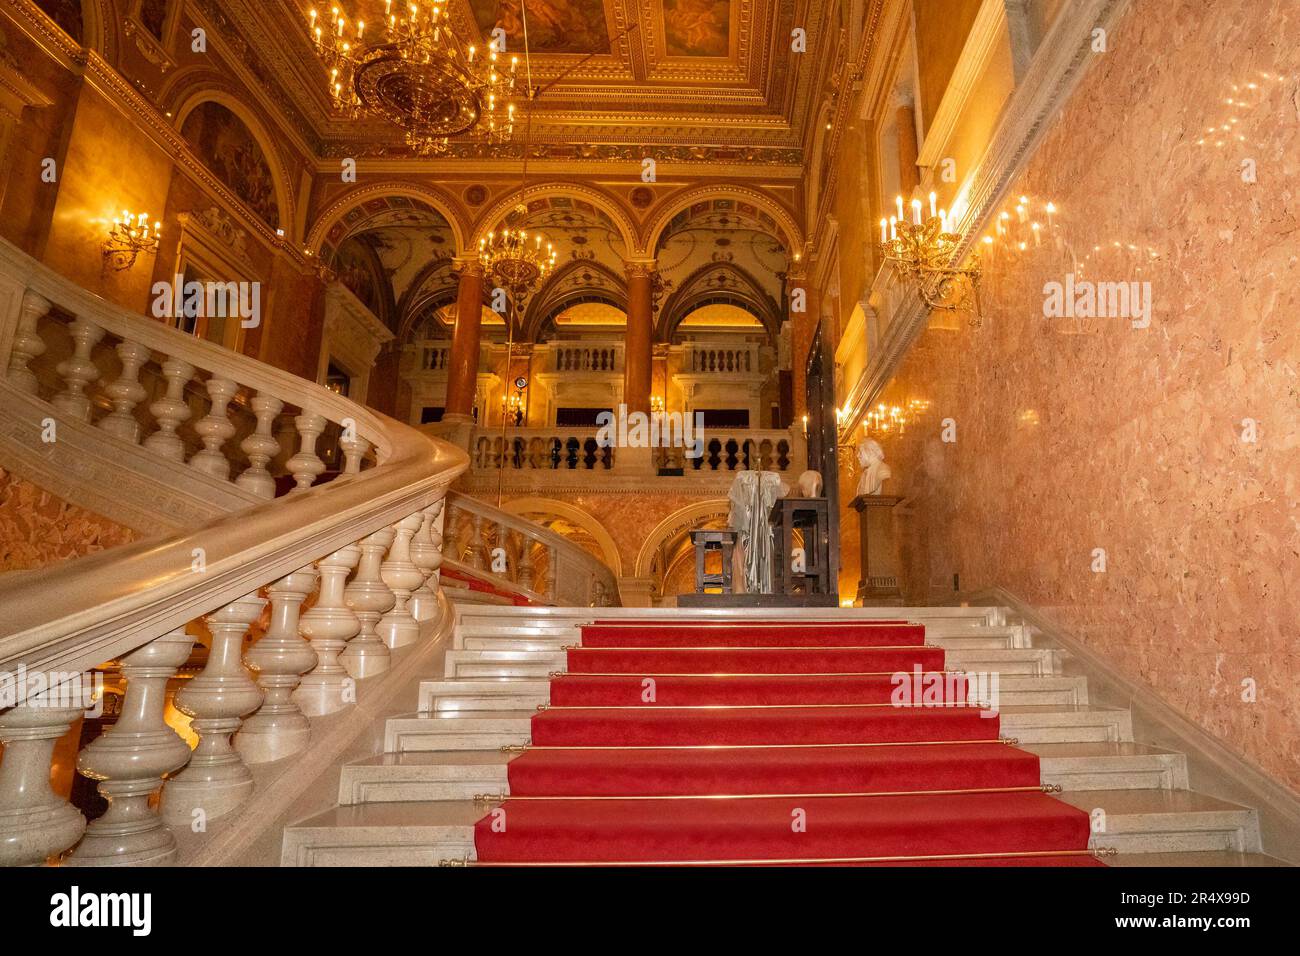 Budapest, Hungary - November 28th, 2022: A staircase in the Hungarian State Opera House, Budapest, Hungary. Stock Photo